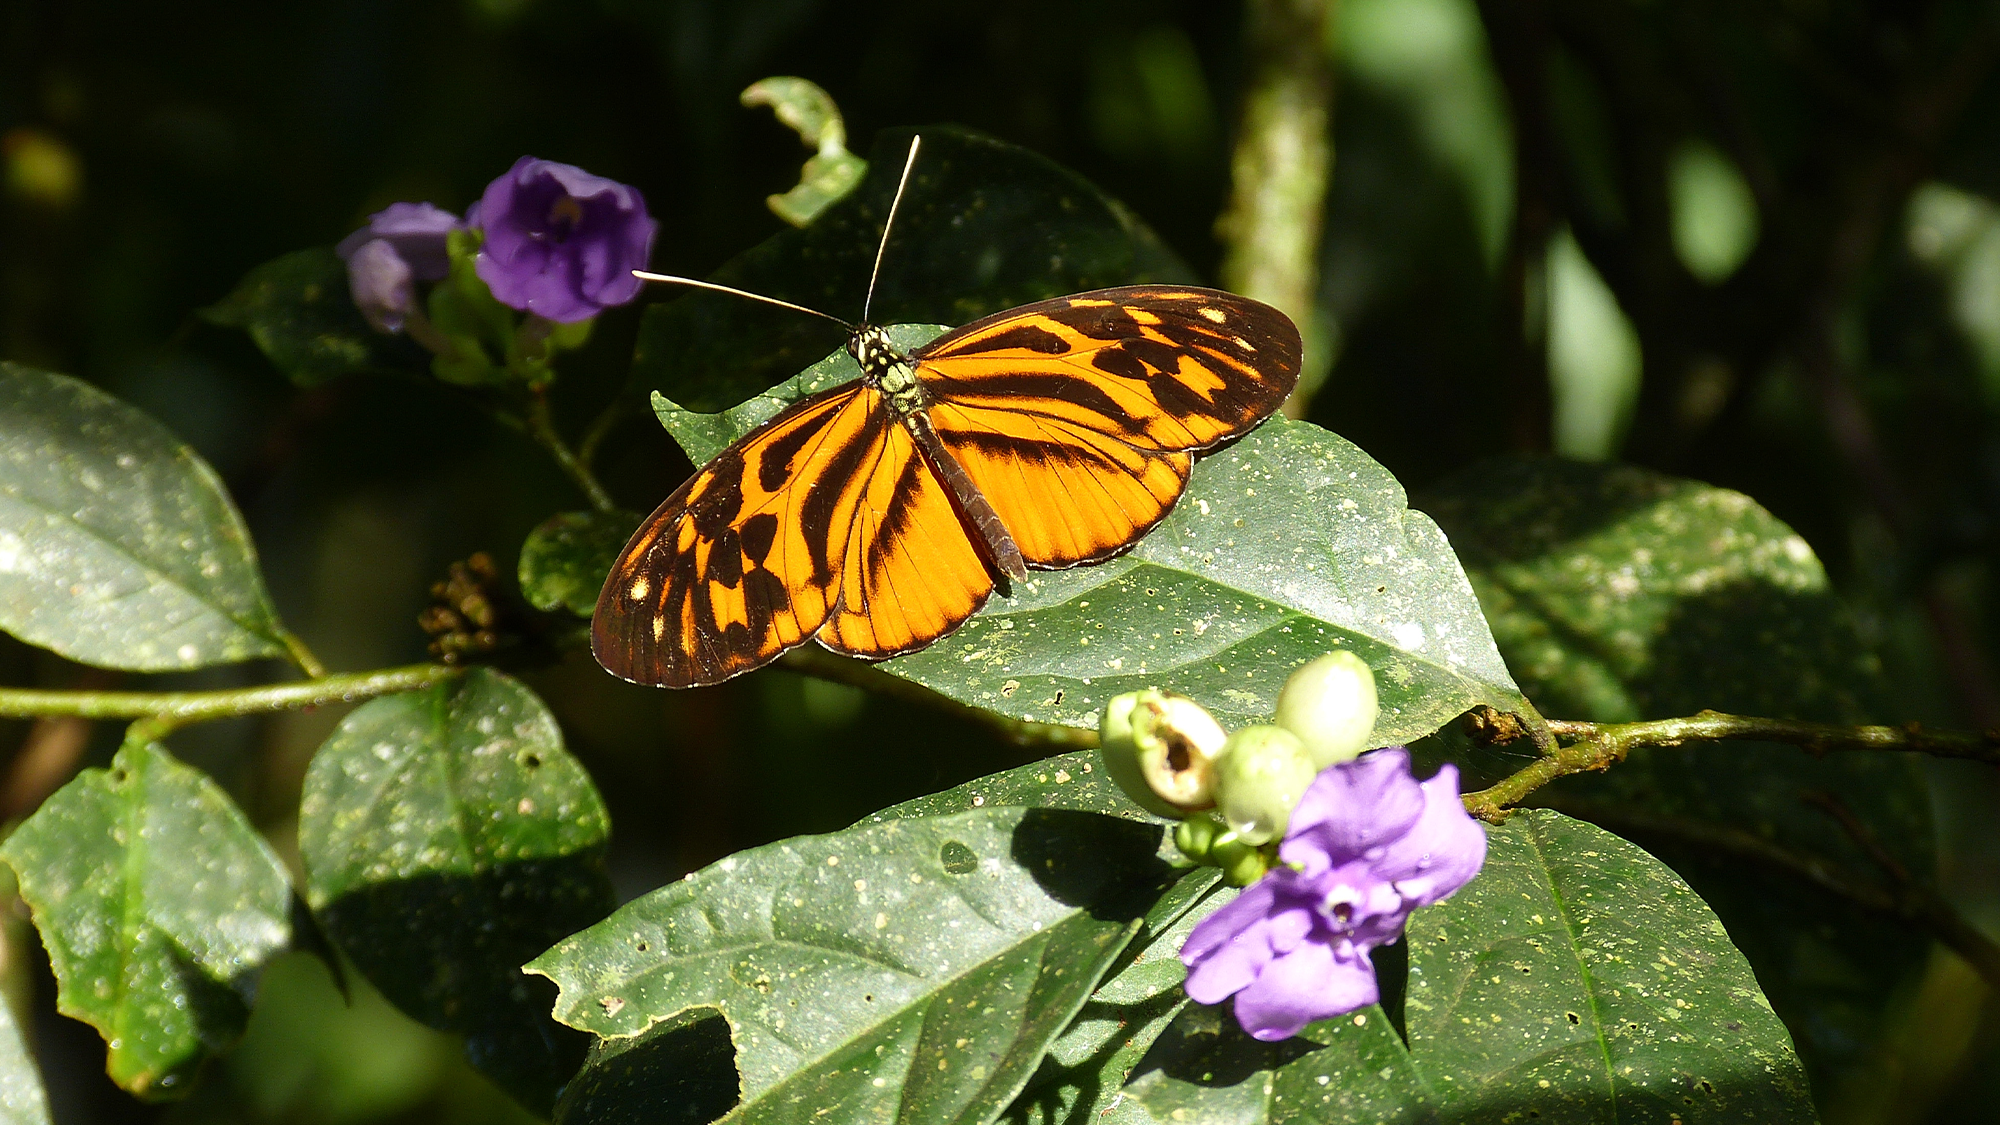 an orange and black butterfly lands on a green leaf with purple flowers